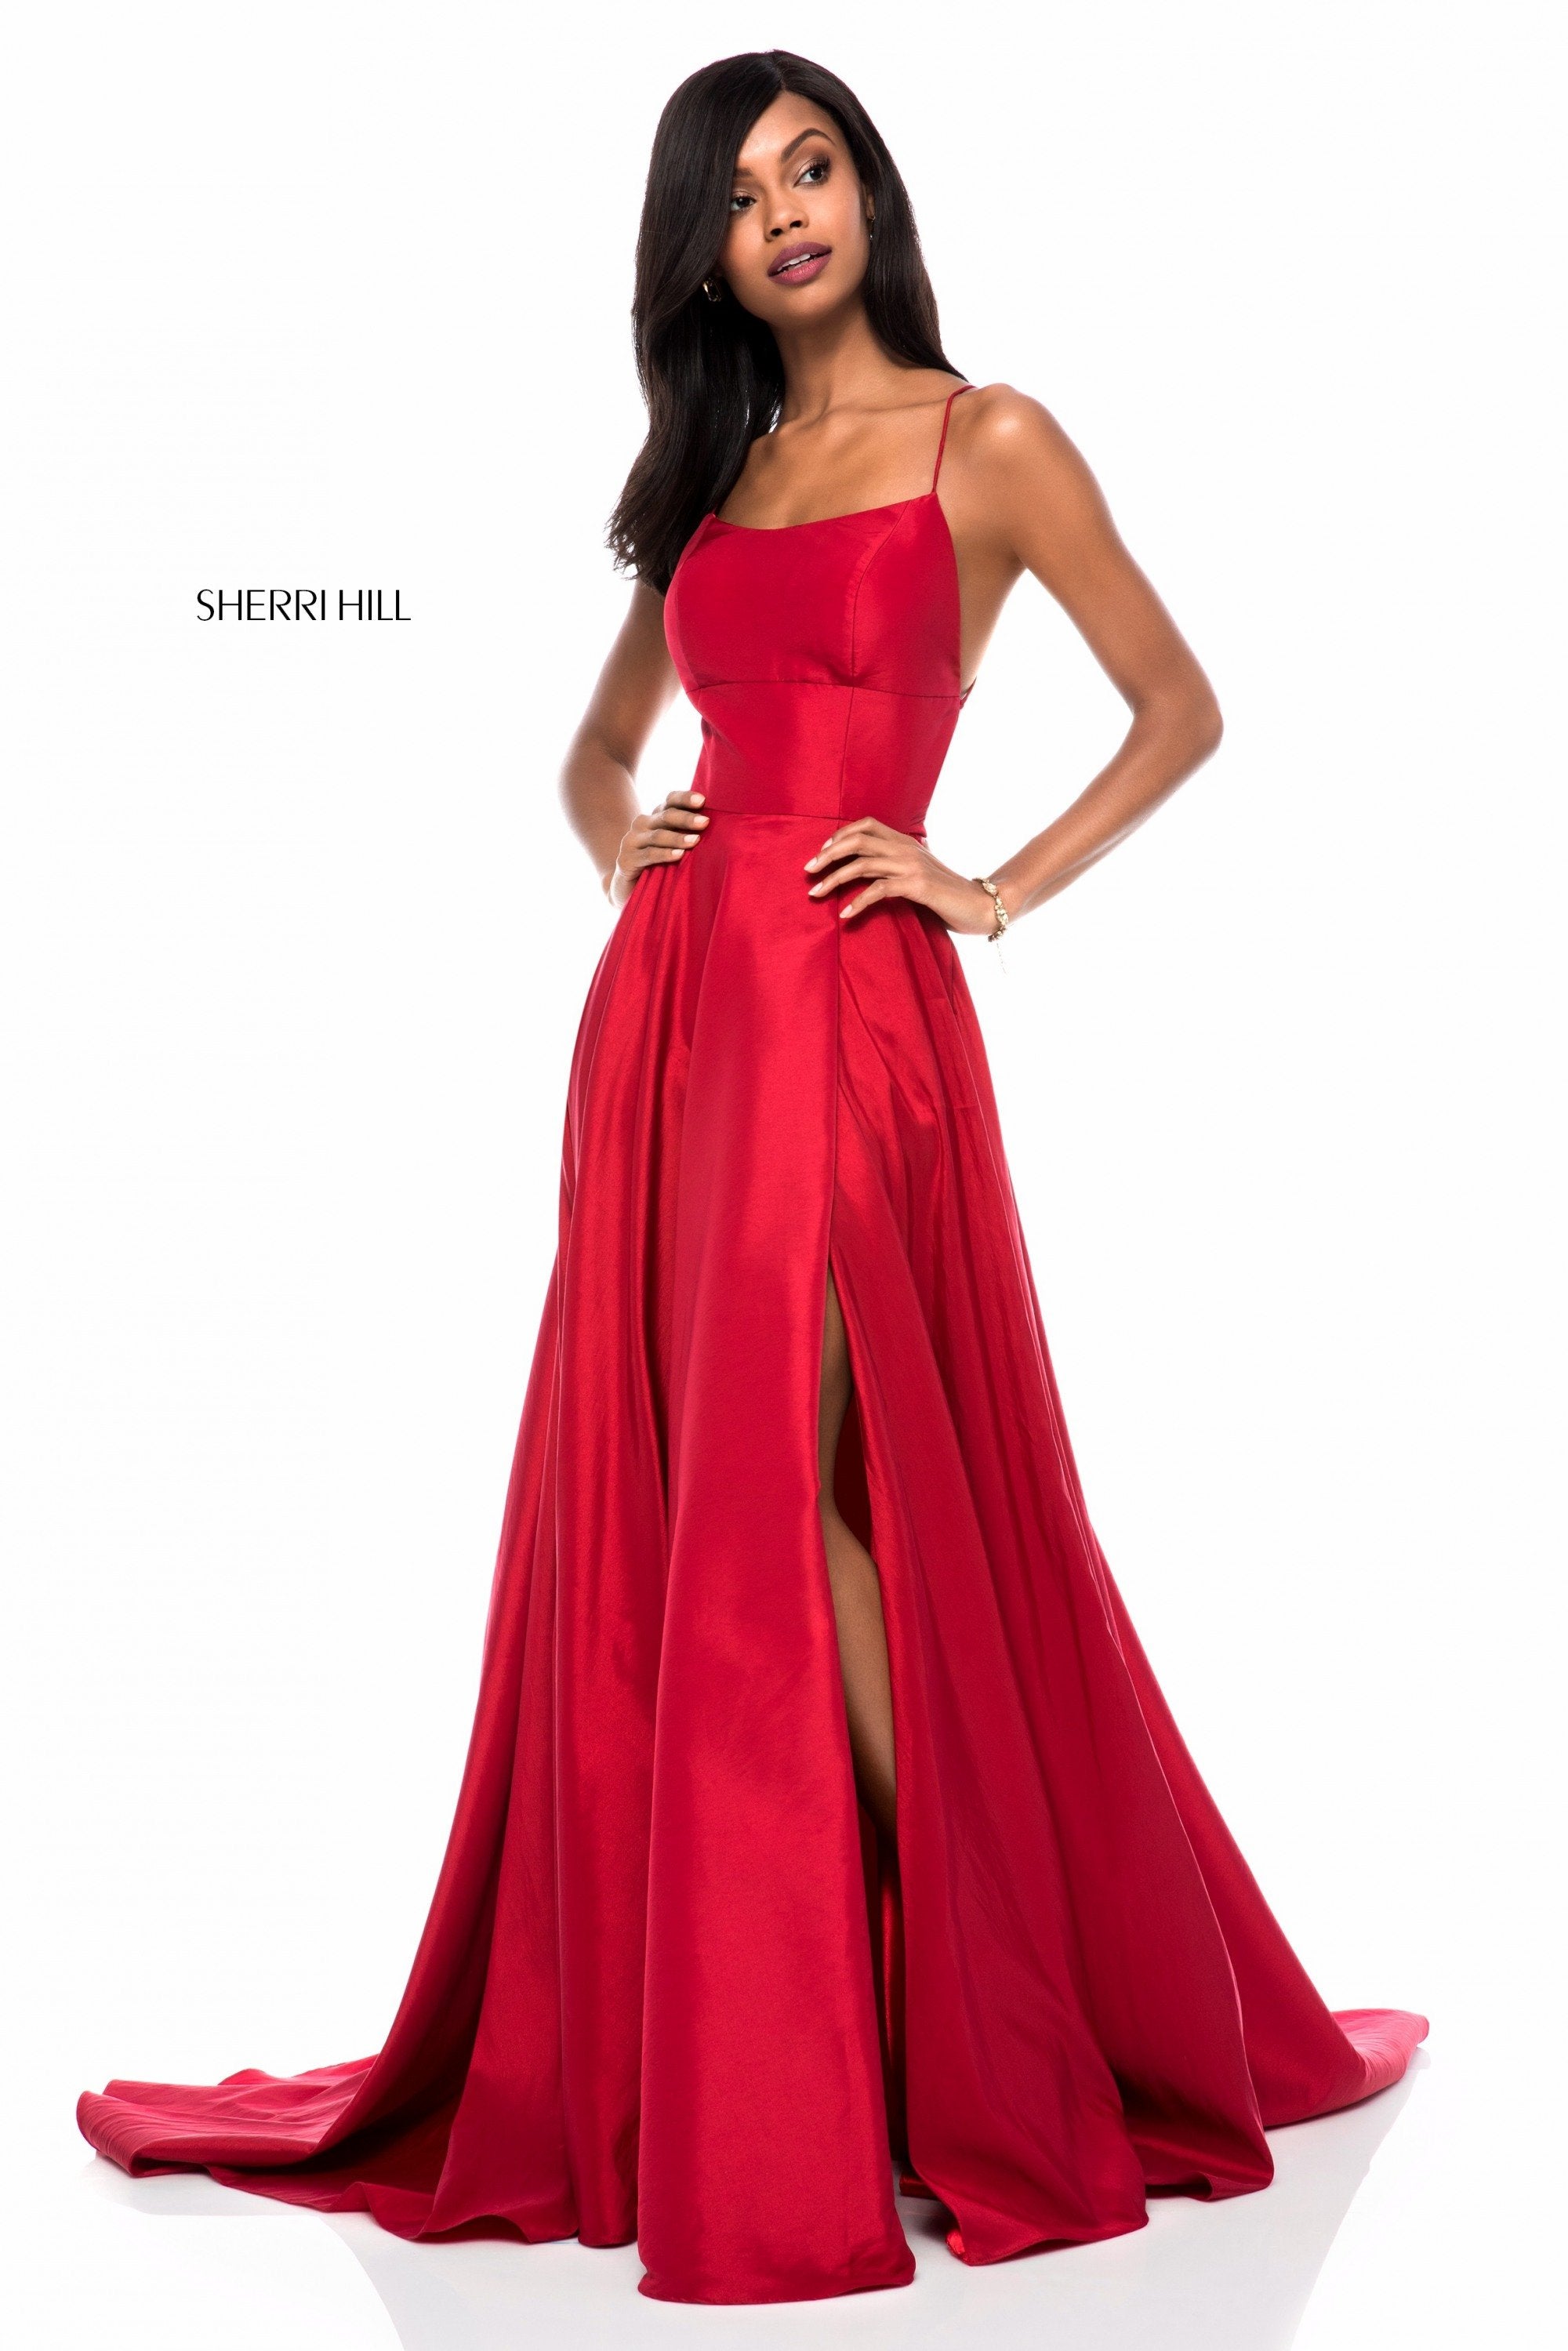 Sherri Hill 52022 dress images in these colors: Black, Navy, Red, Emerald, Wine, Yellow, Blush, Bright Pink, Light Blue, Royal.